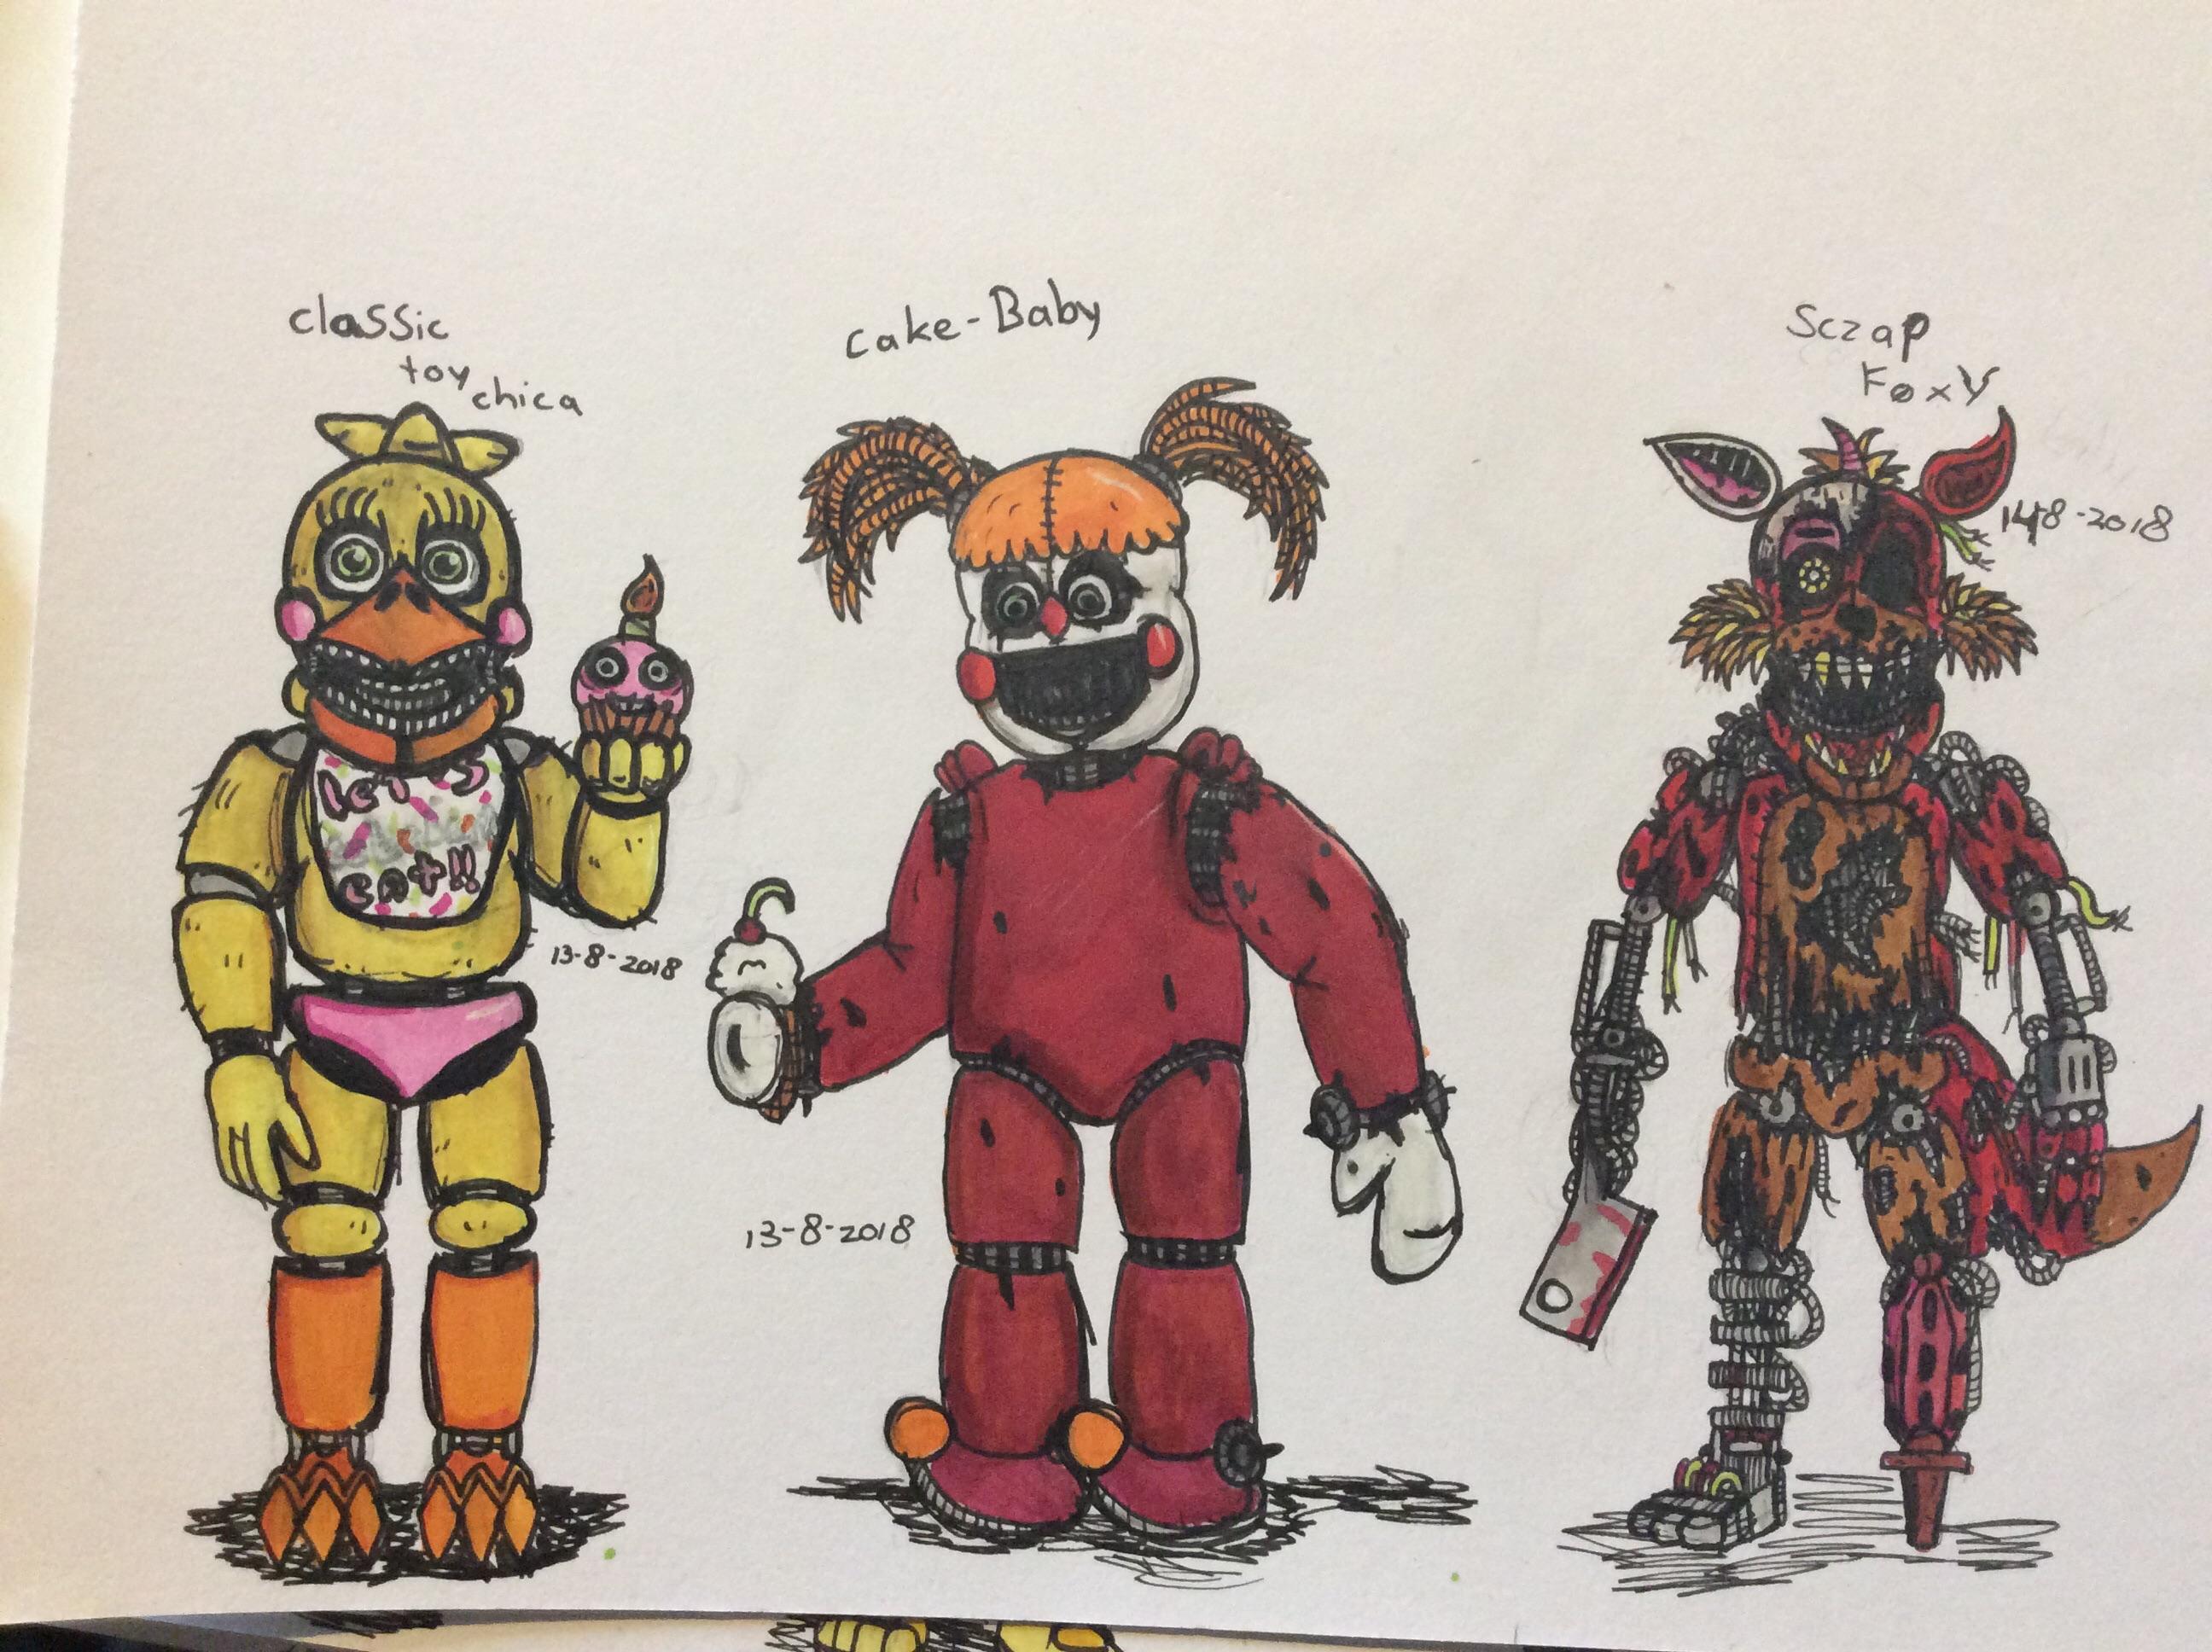 Fnaf Characters Drawings at PaintingValley.com Explore colle